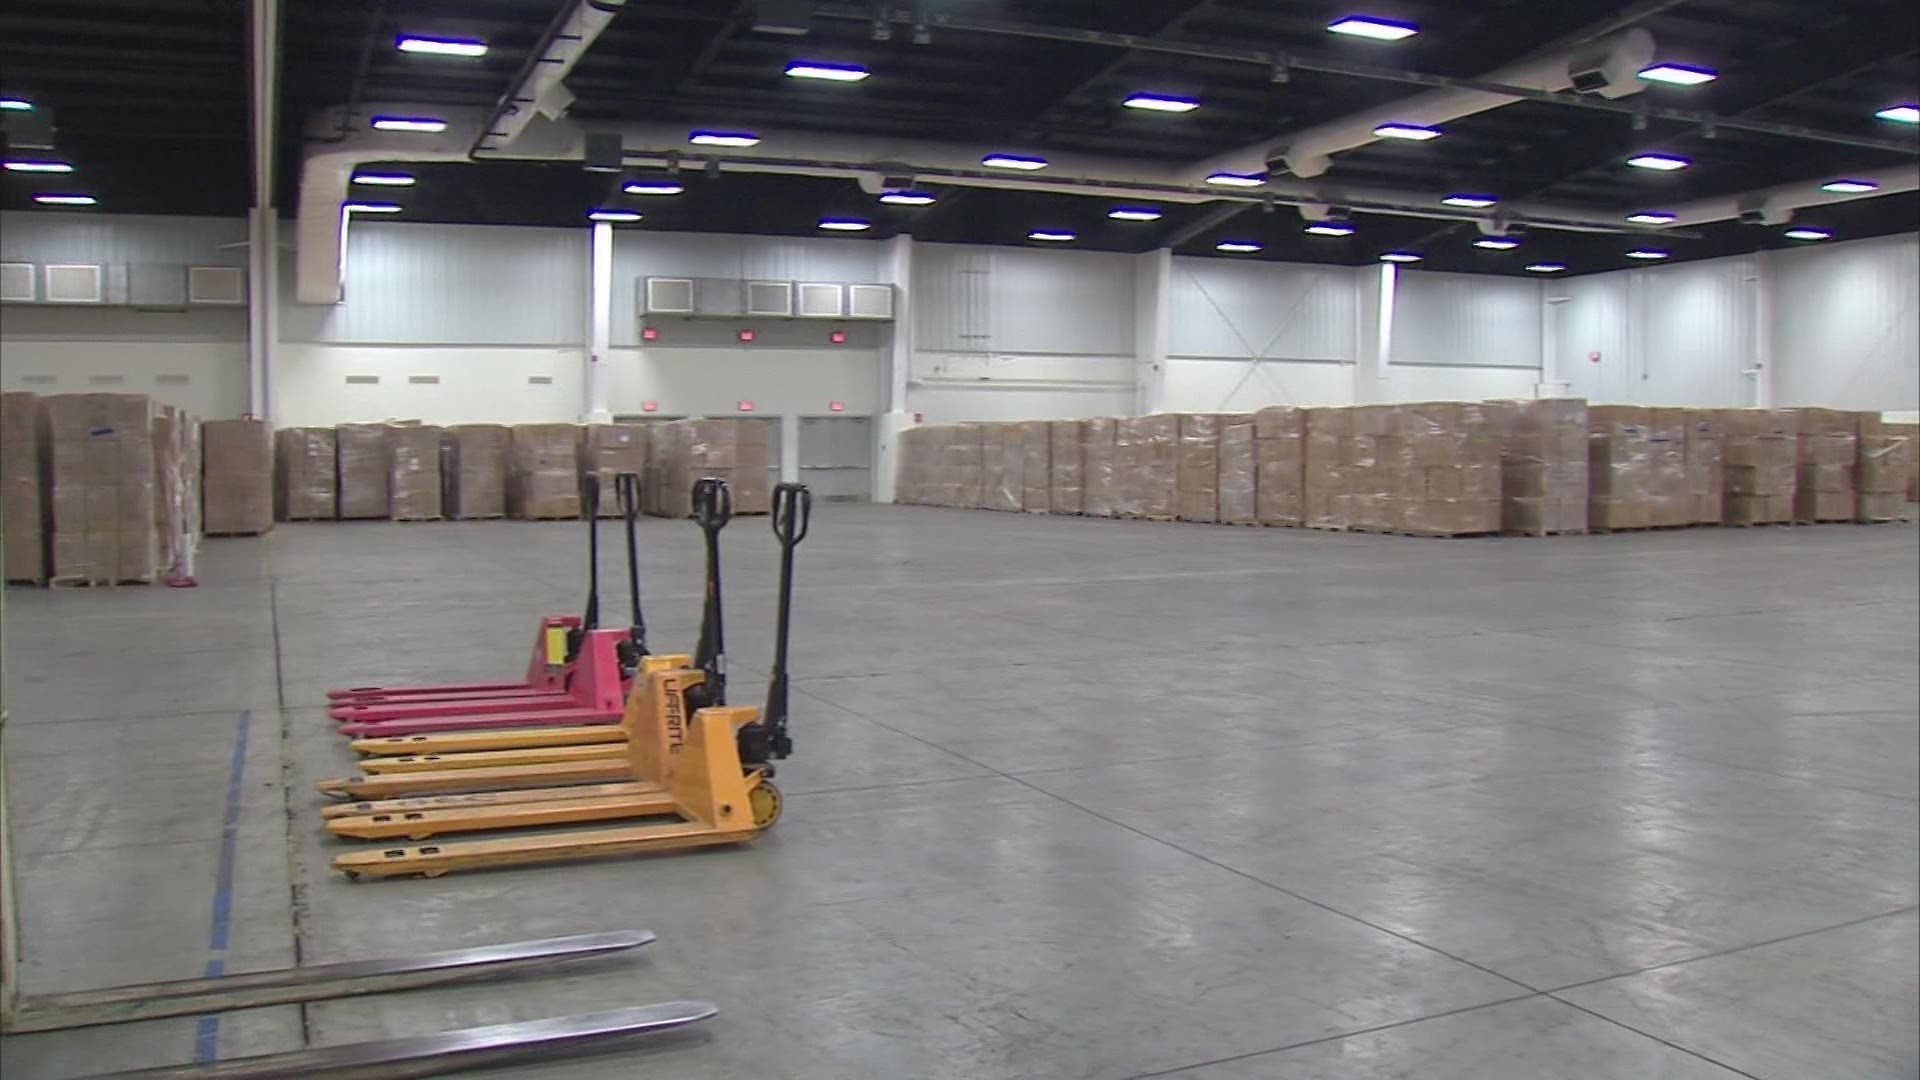 Thousands of boxes of PPE will be shipped to facilities across the state.